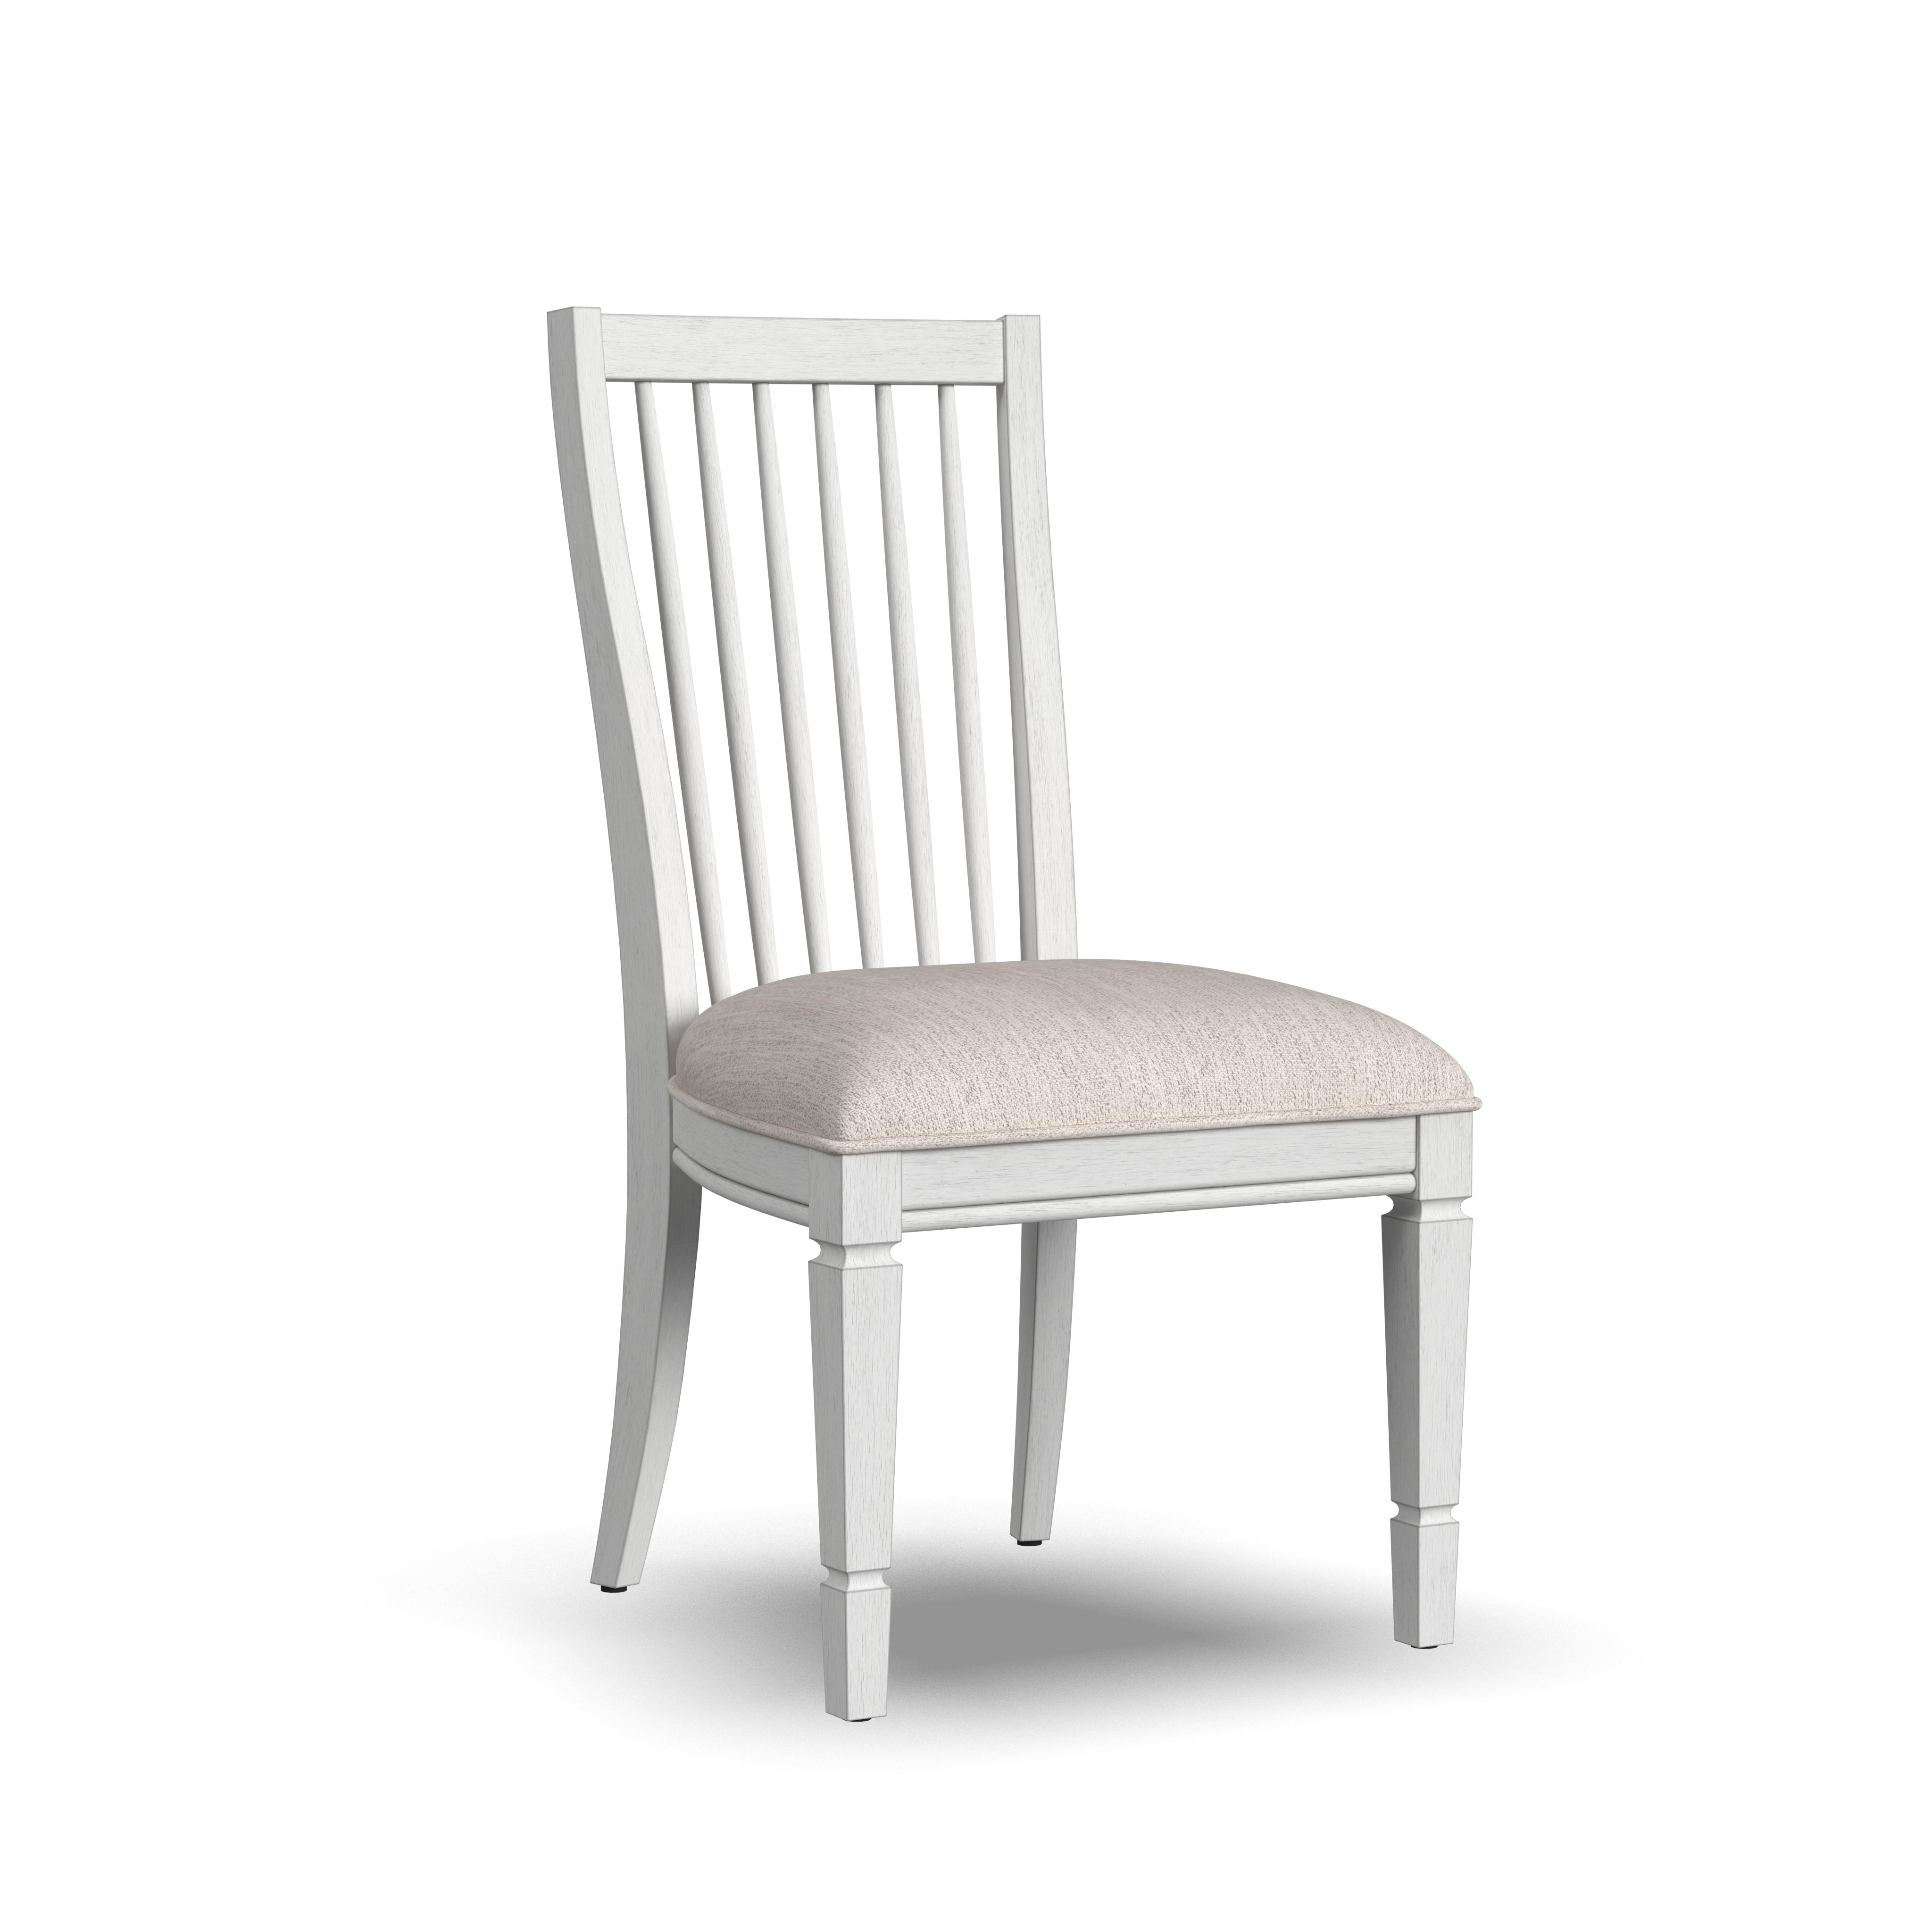 Flexsteel Melody Upholstered Dining Chair